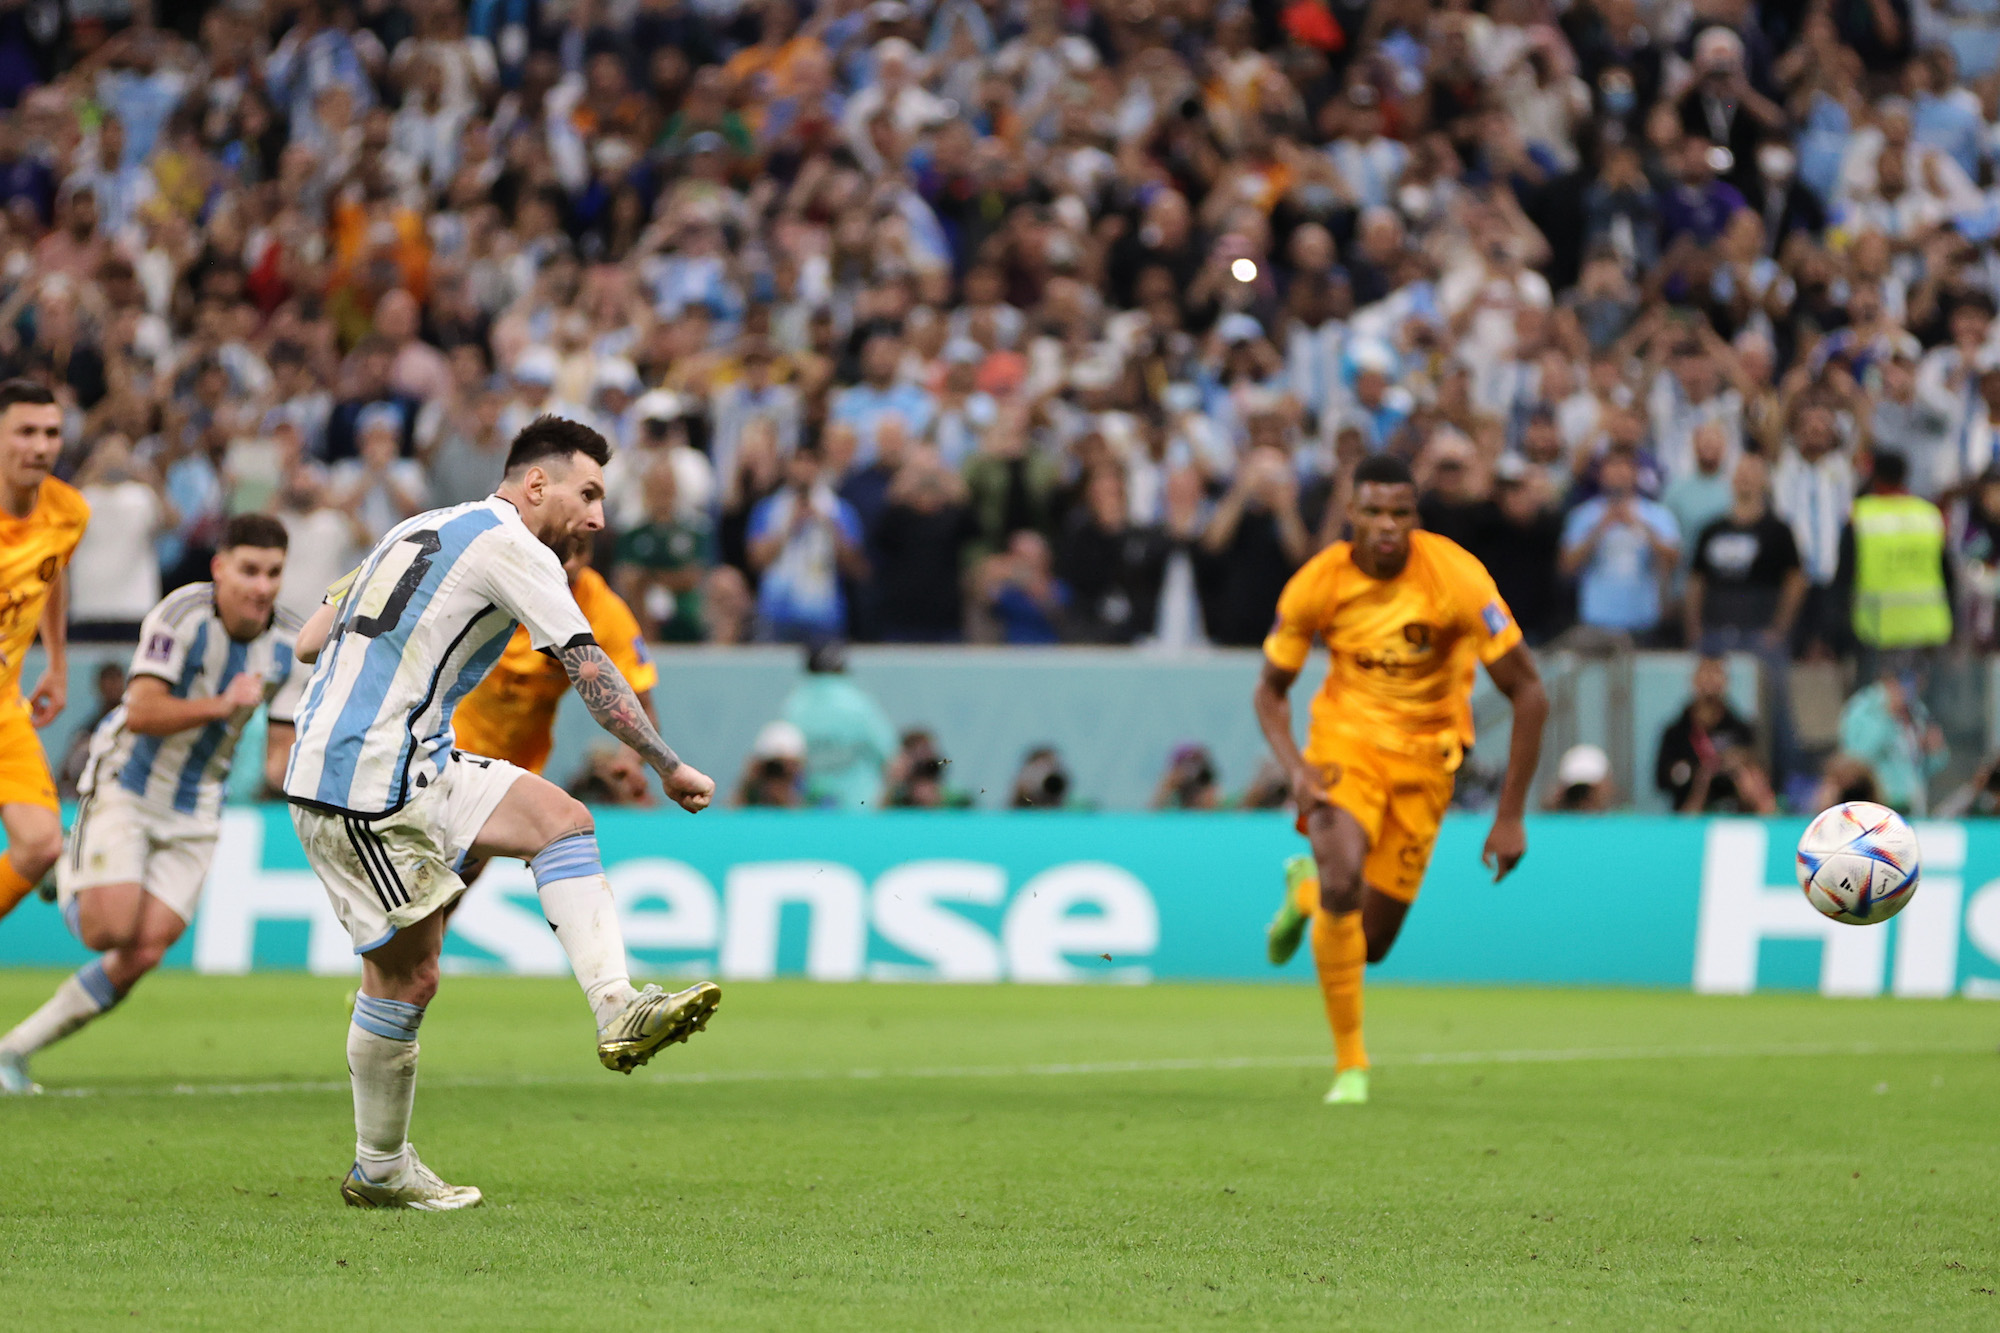 Messi scores Argentina's second goal via a penalty.